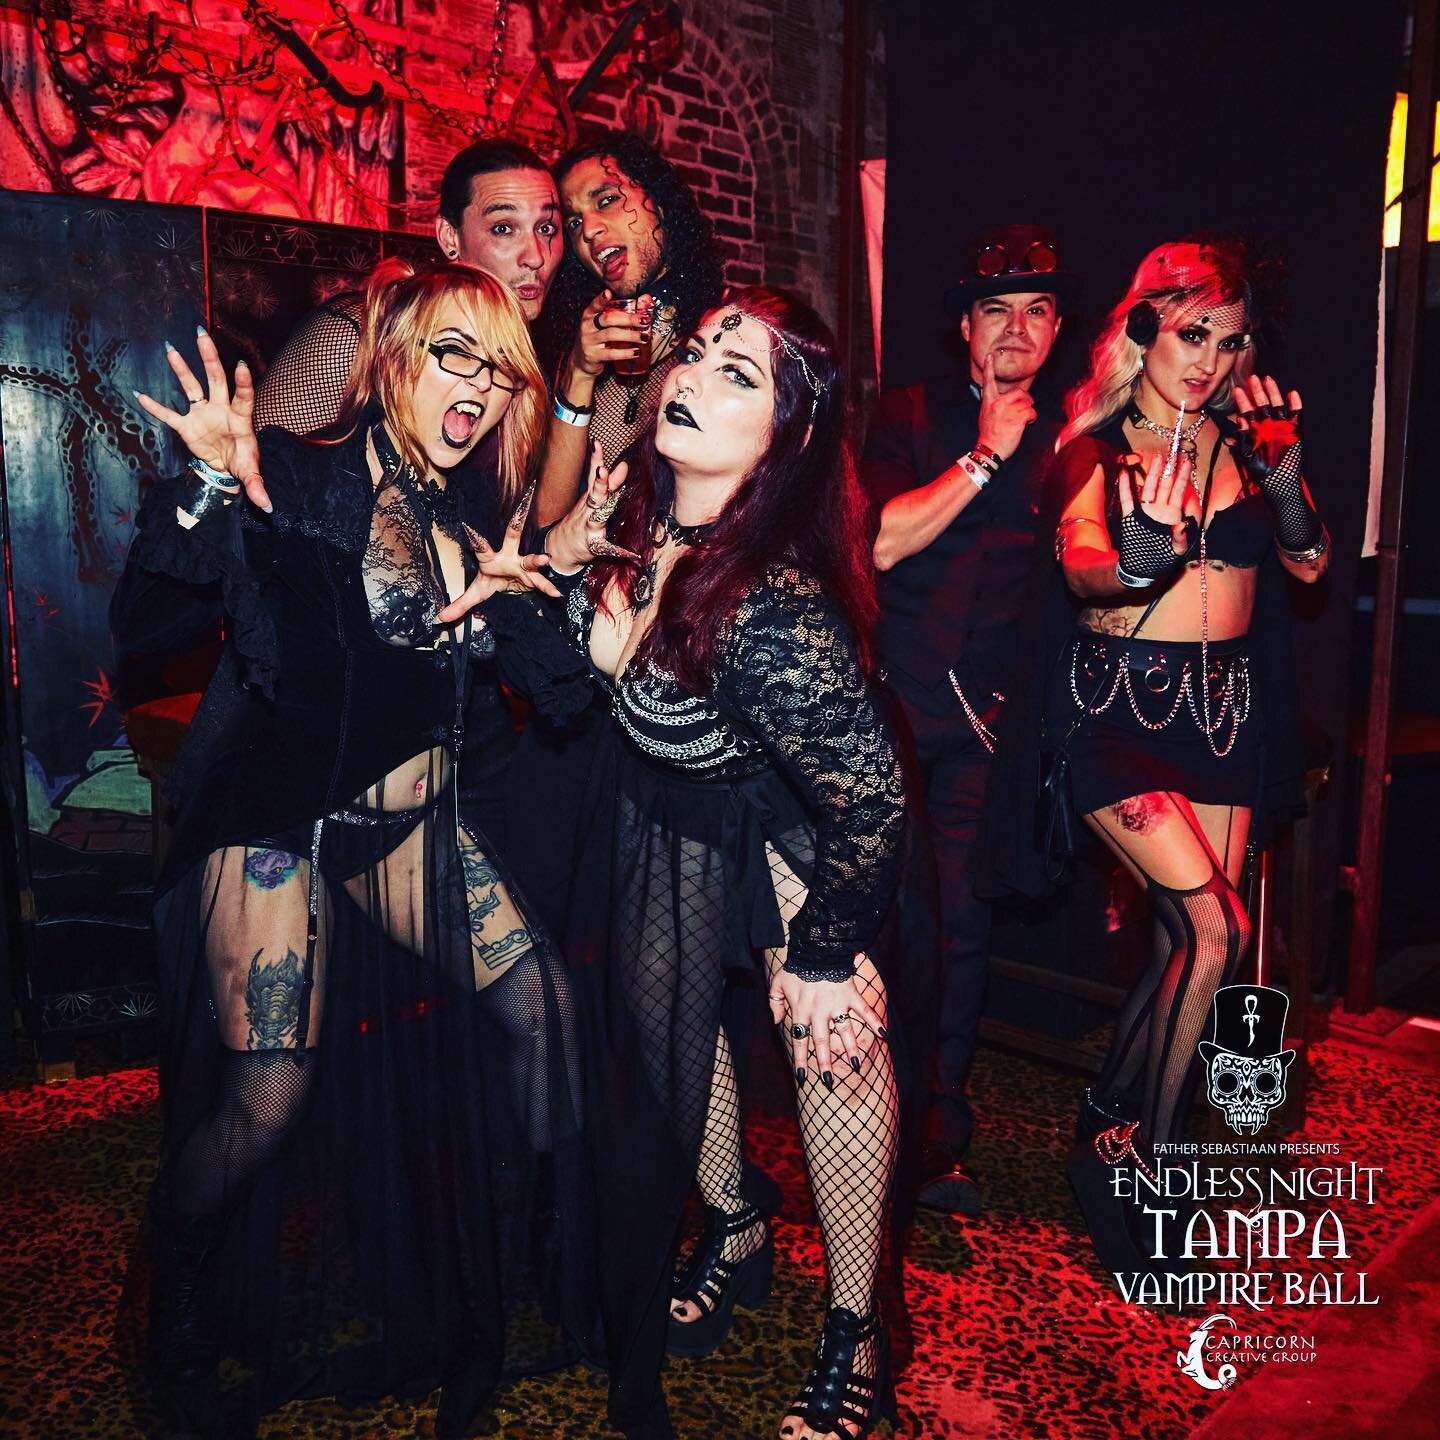 Join us for the Tampa Vampire Ball! 🦇🦇🦇

Endless Night : Tampa Vampire Ball will take place on Saturday May 20th 2023  10pm to 3am at the legendary Castle Ybor in Tampa Florida.  Entertainment includes live shock magician Dan Sperry, burlesque by 